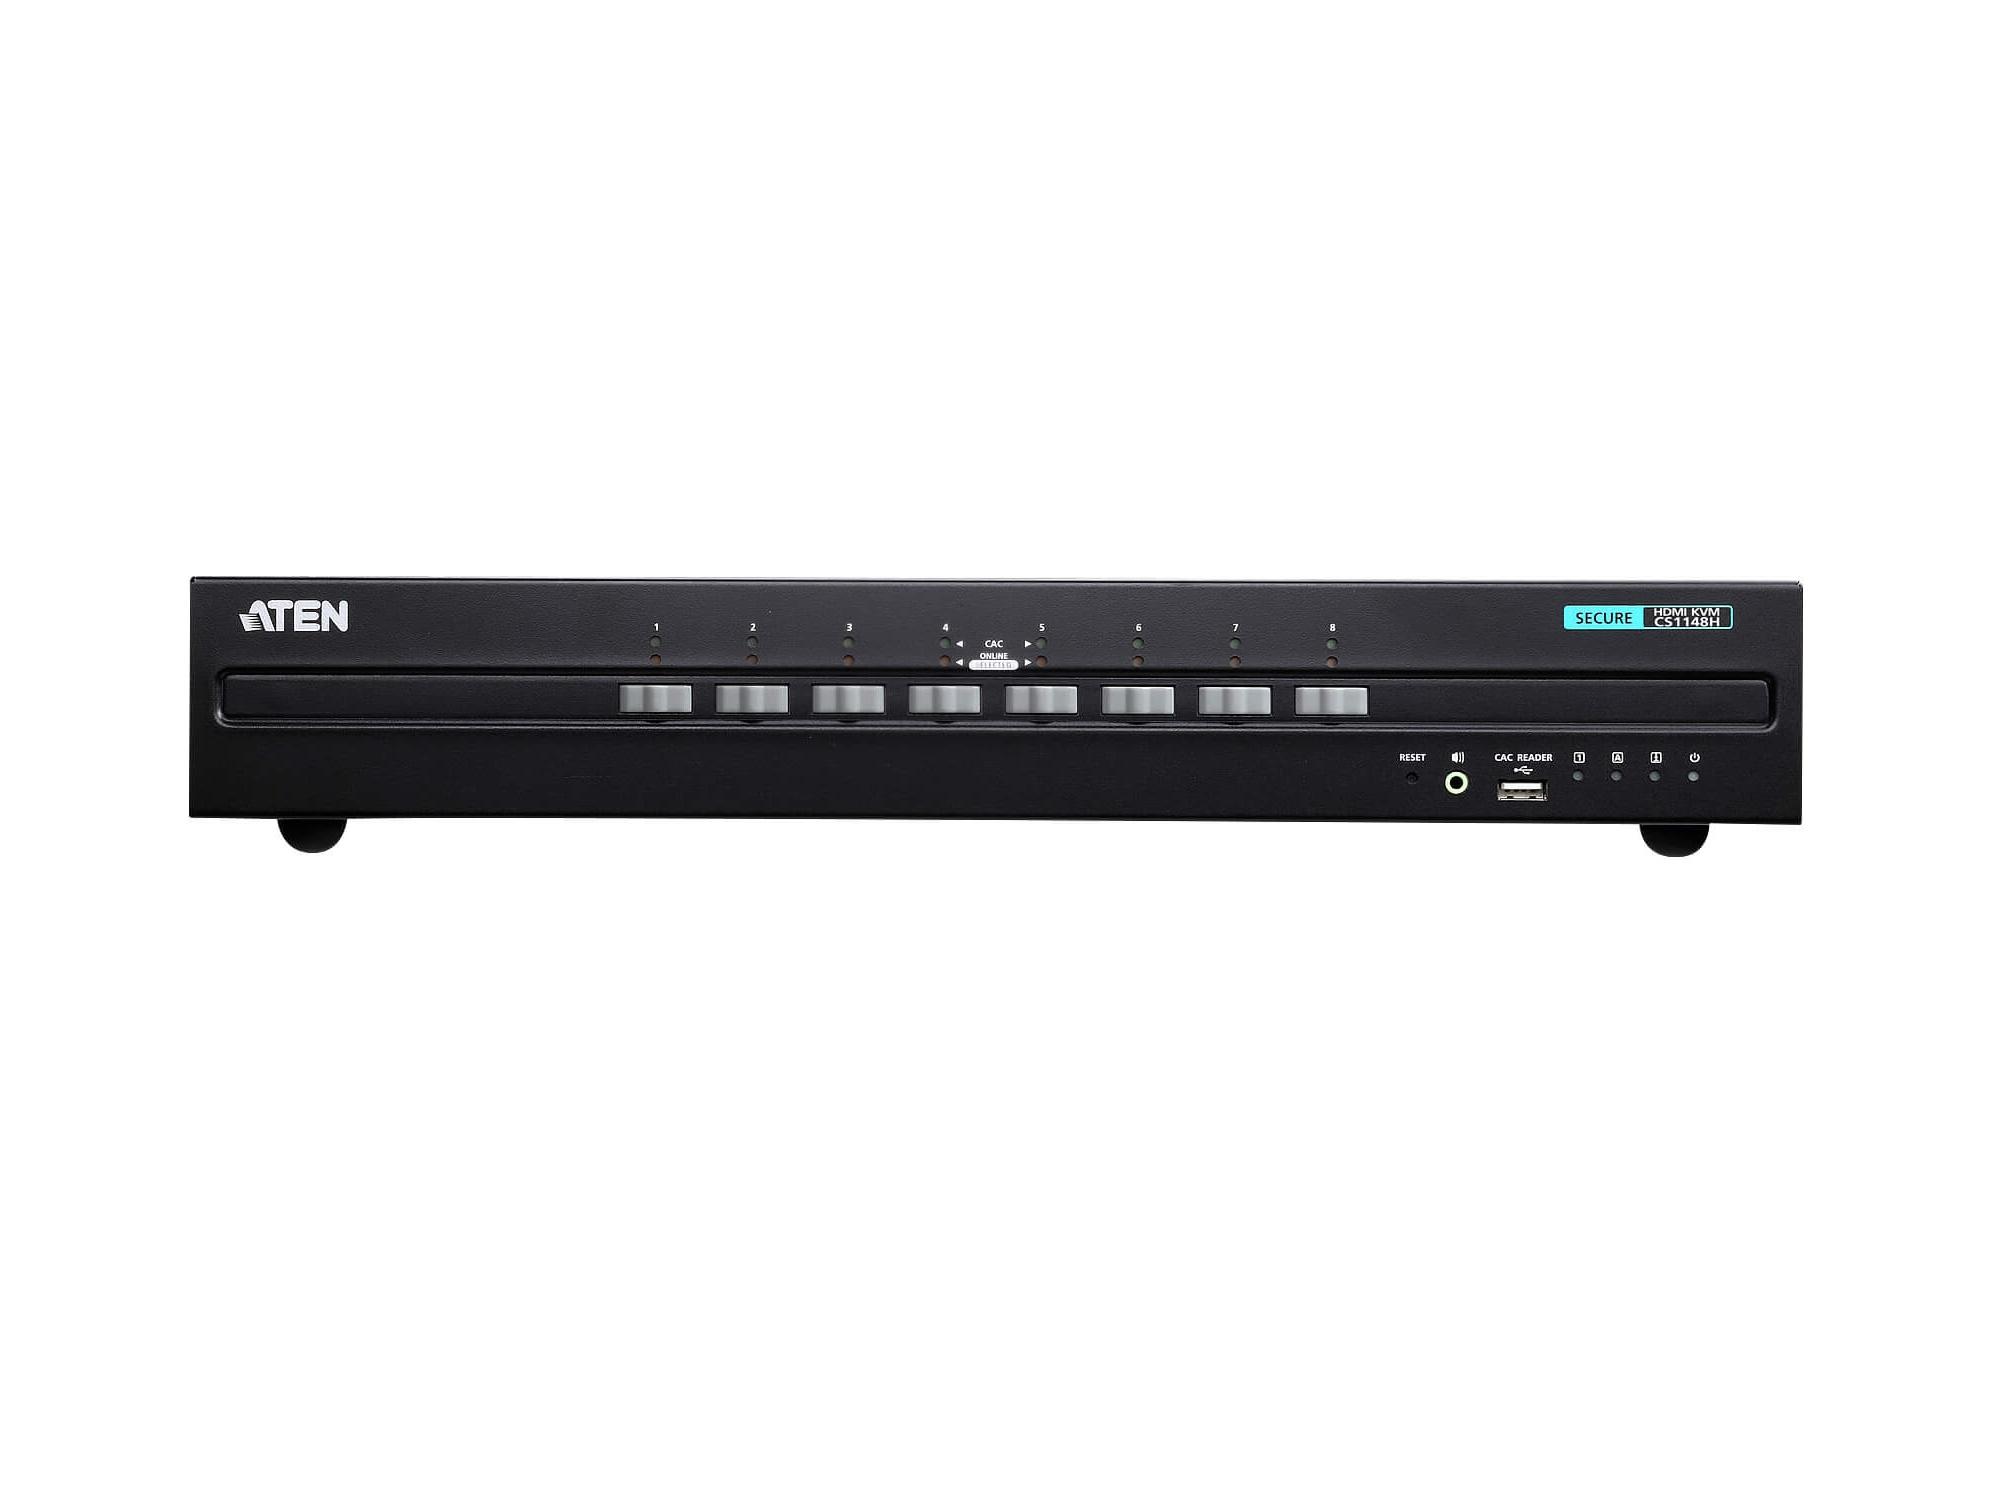 CS1148H 8-Port USB HDMI Dual Display Secure KVM Switch (PSS PP v3.0 Compliant) by Aten